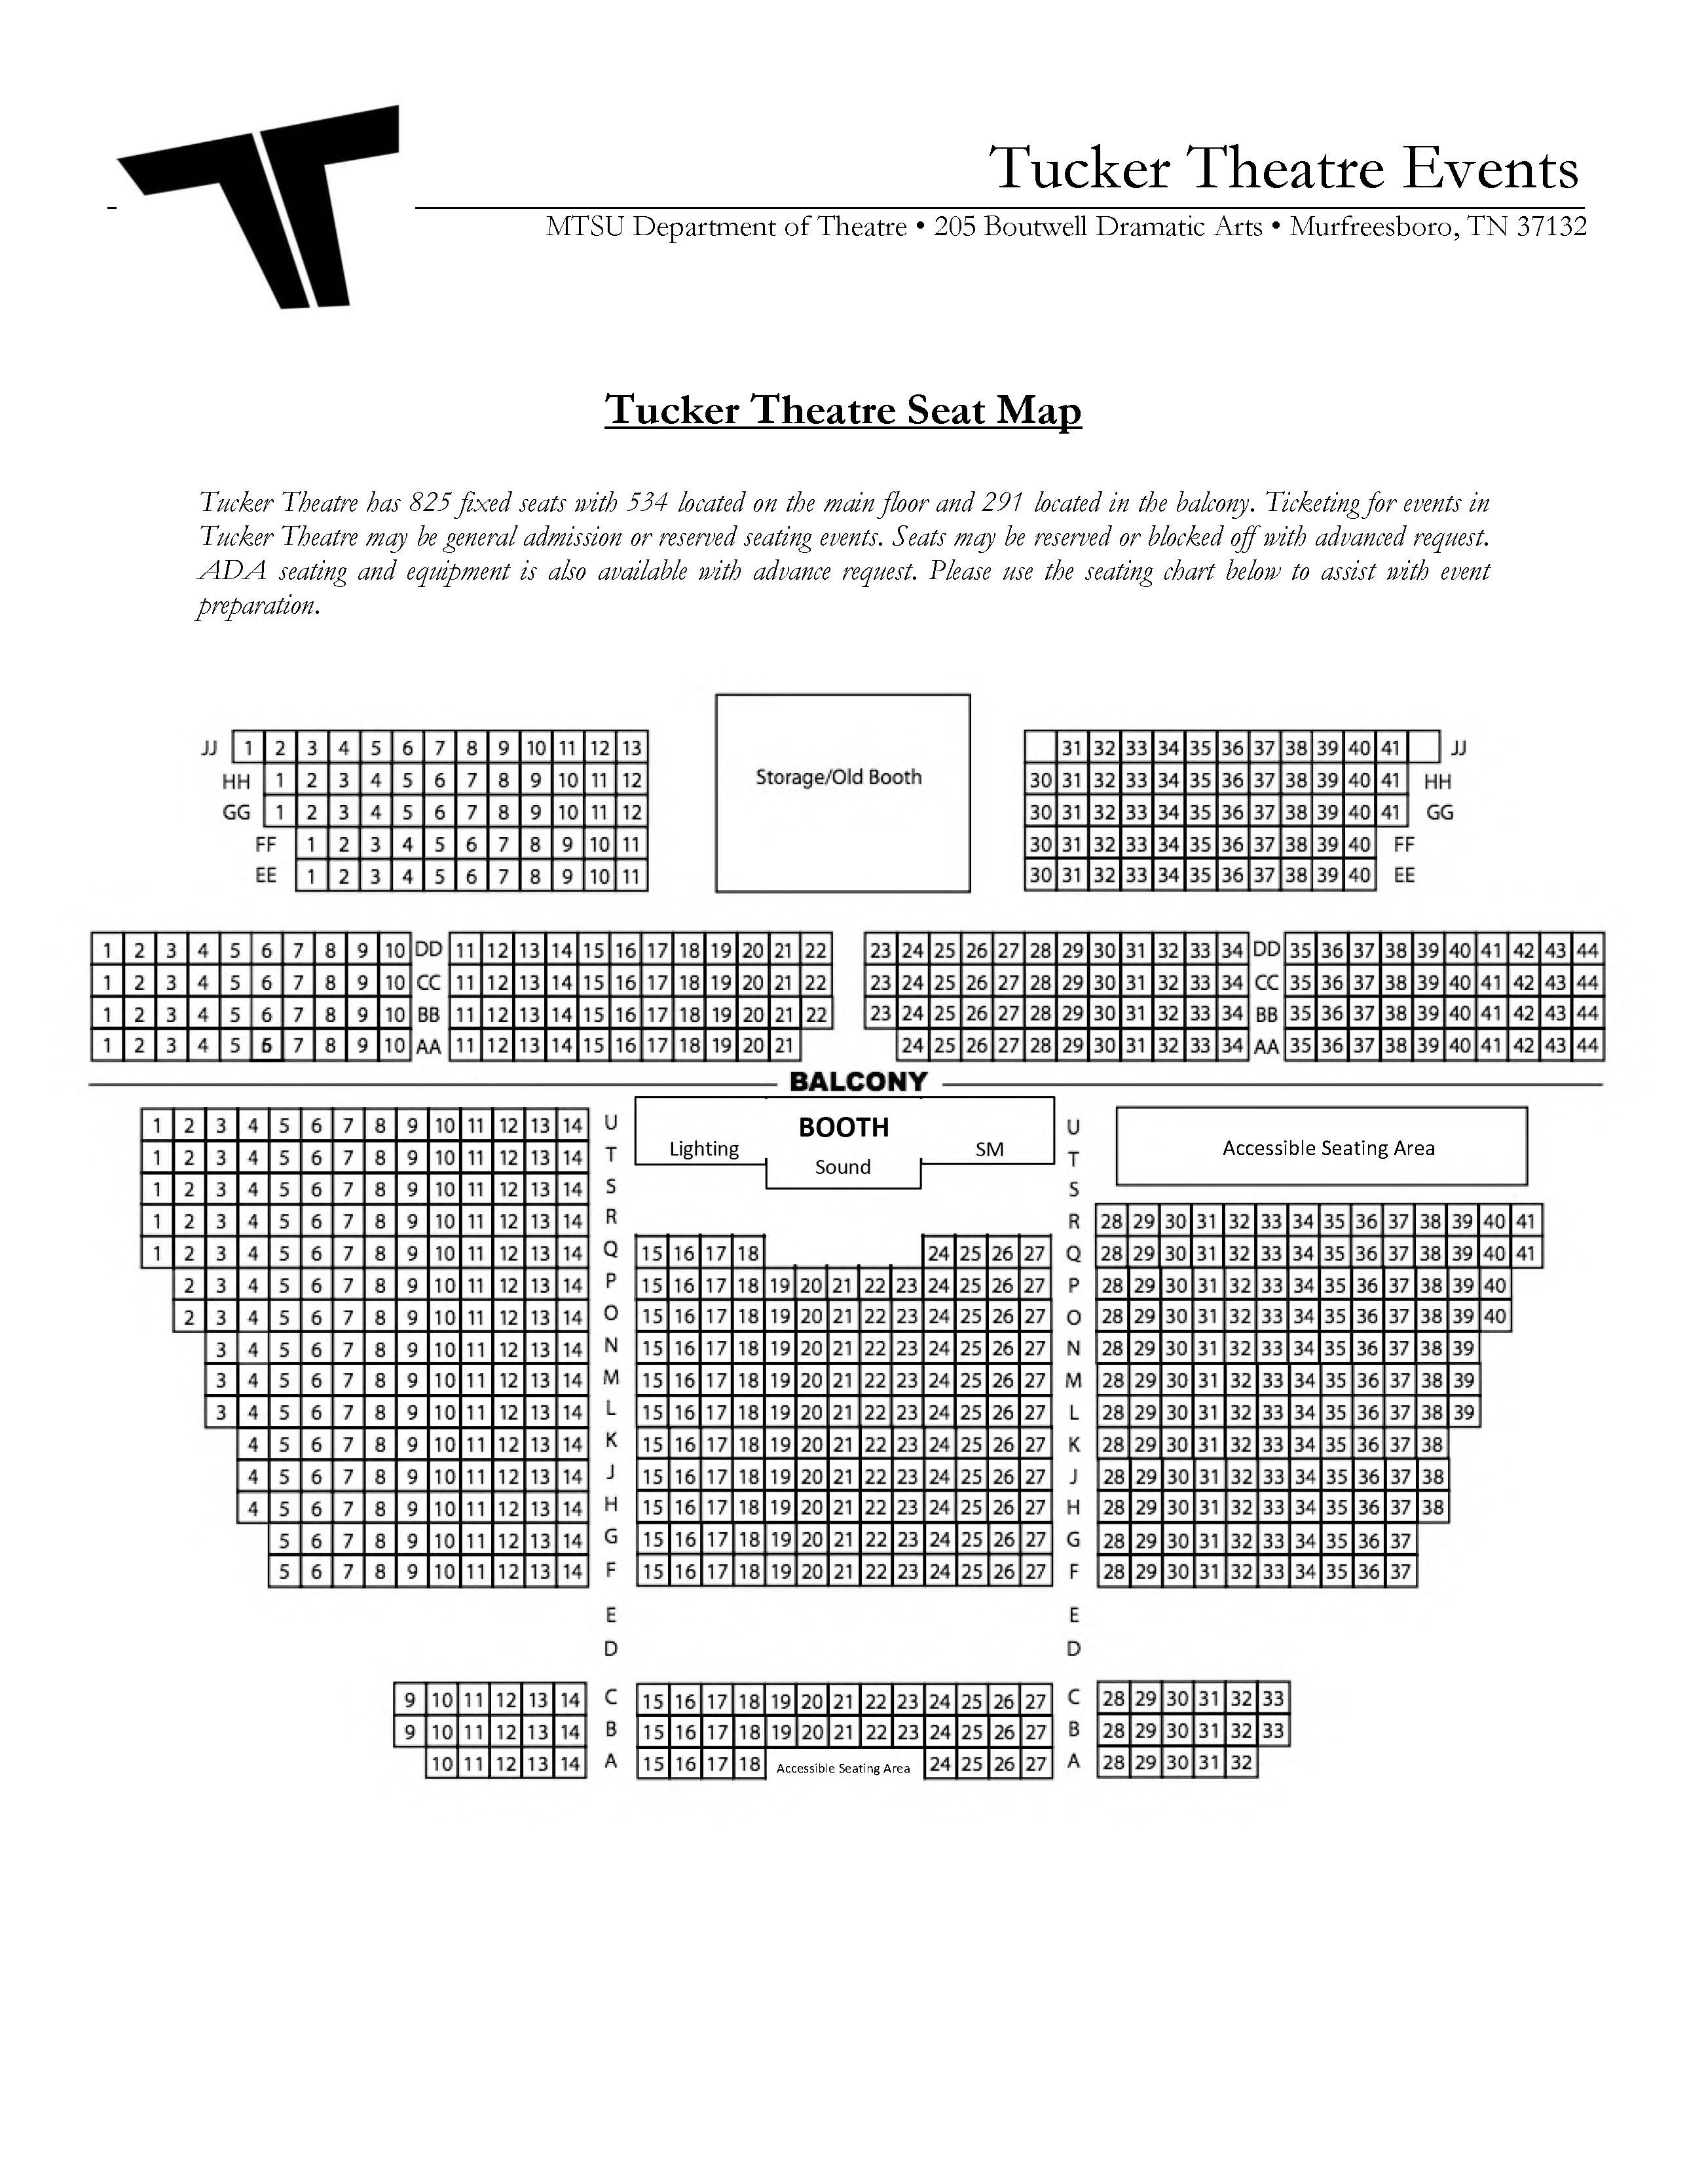 Tucker Theatre Seating Map